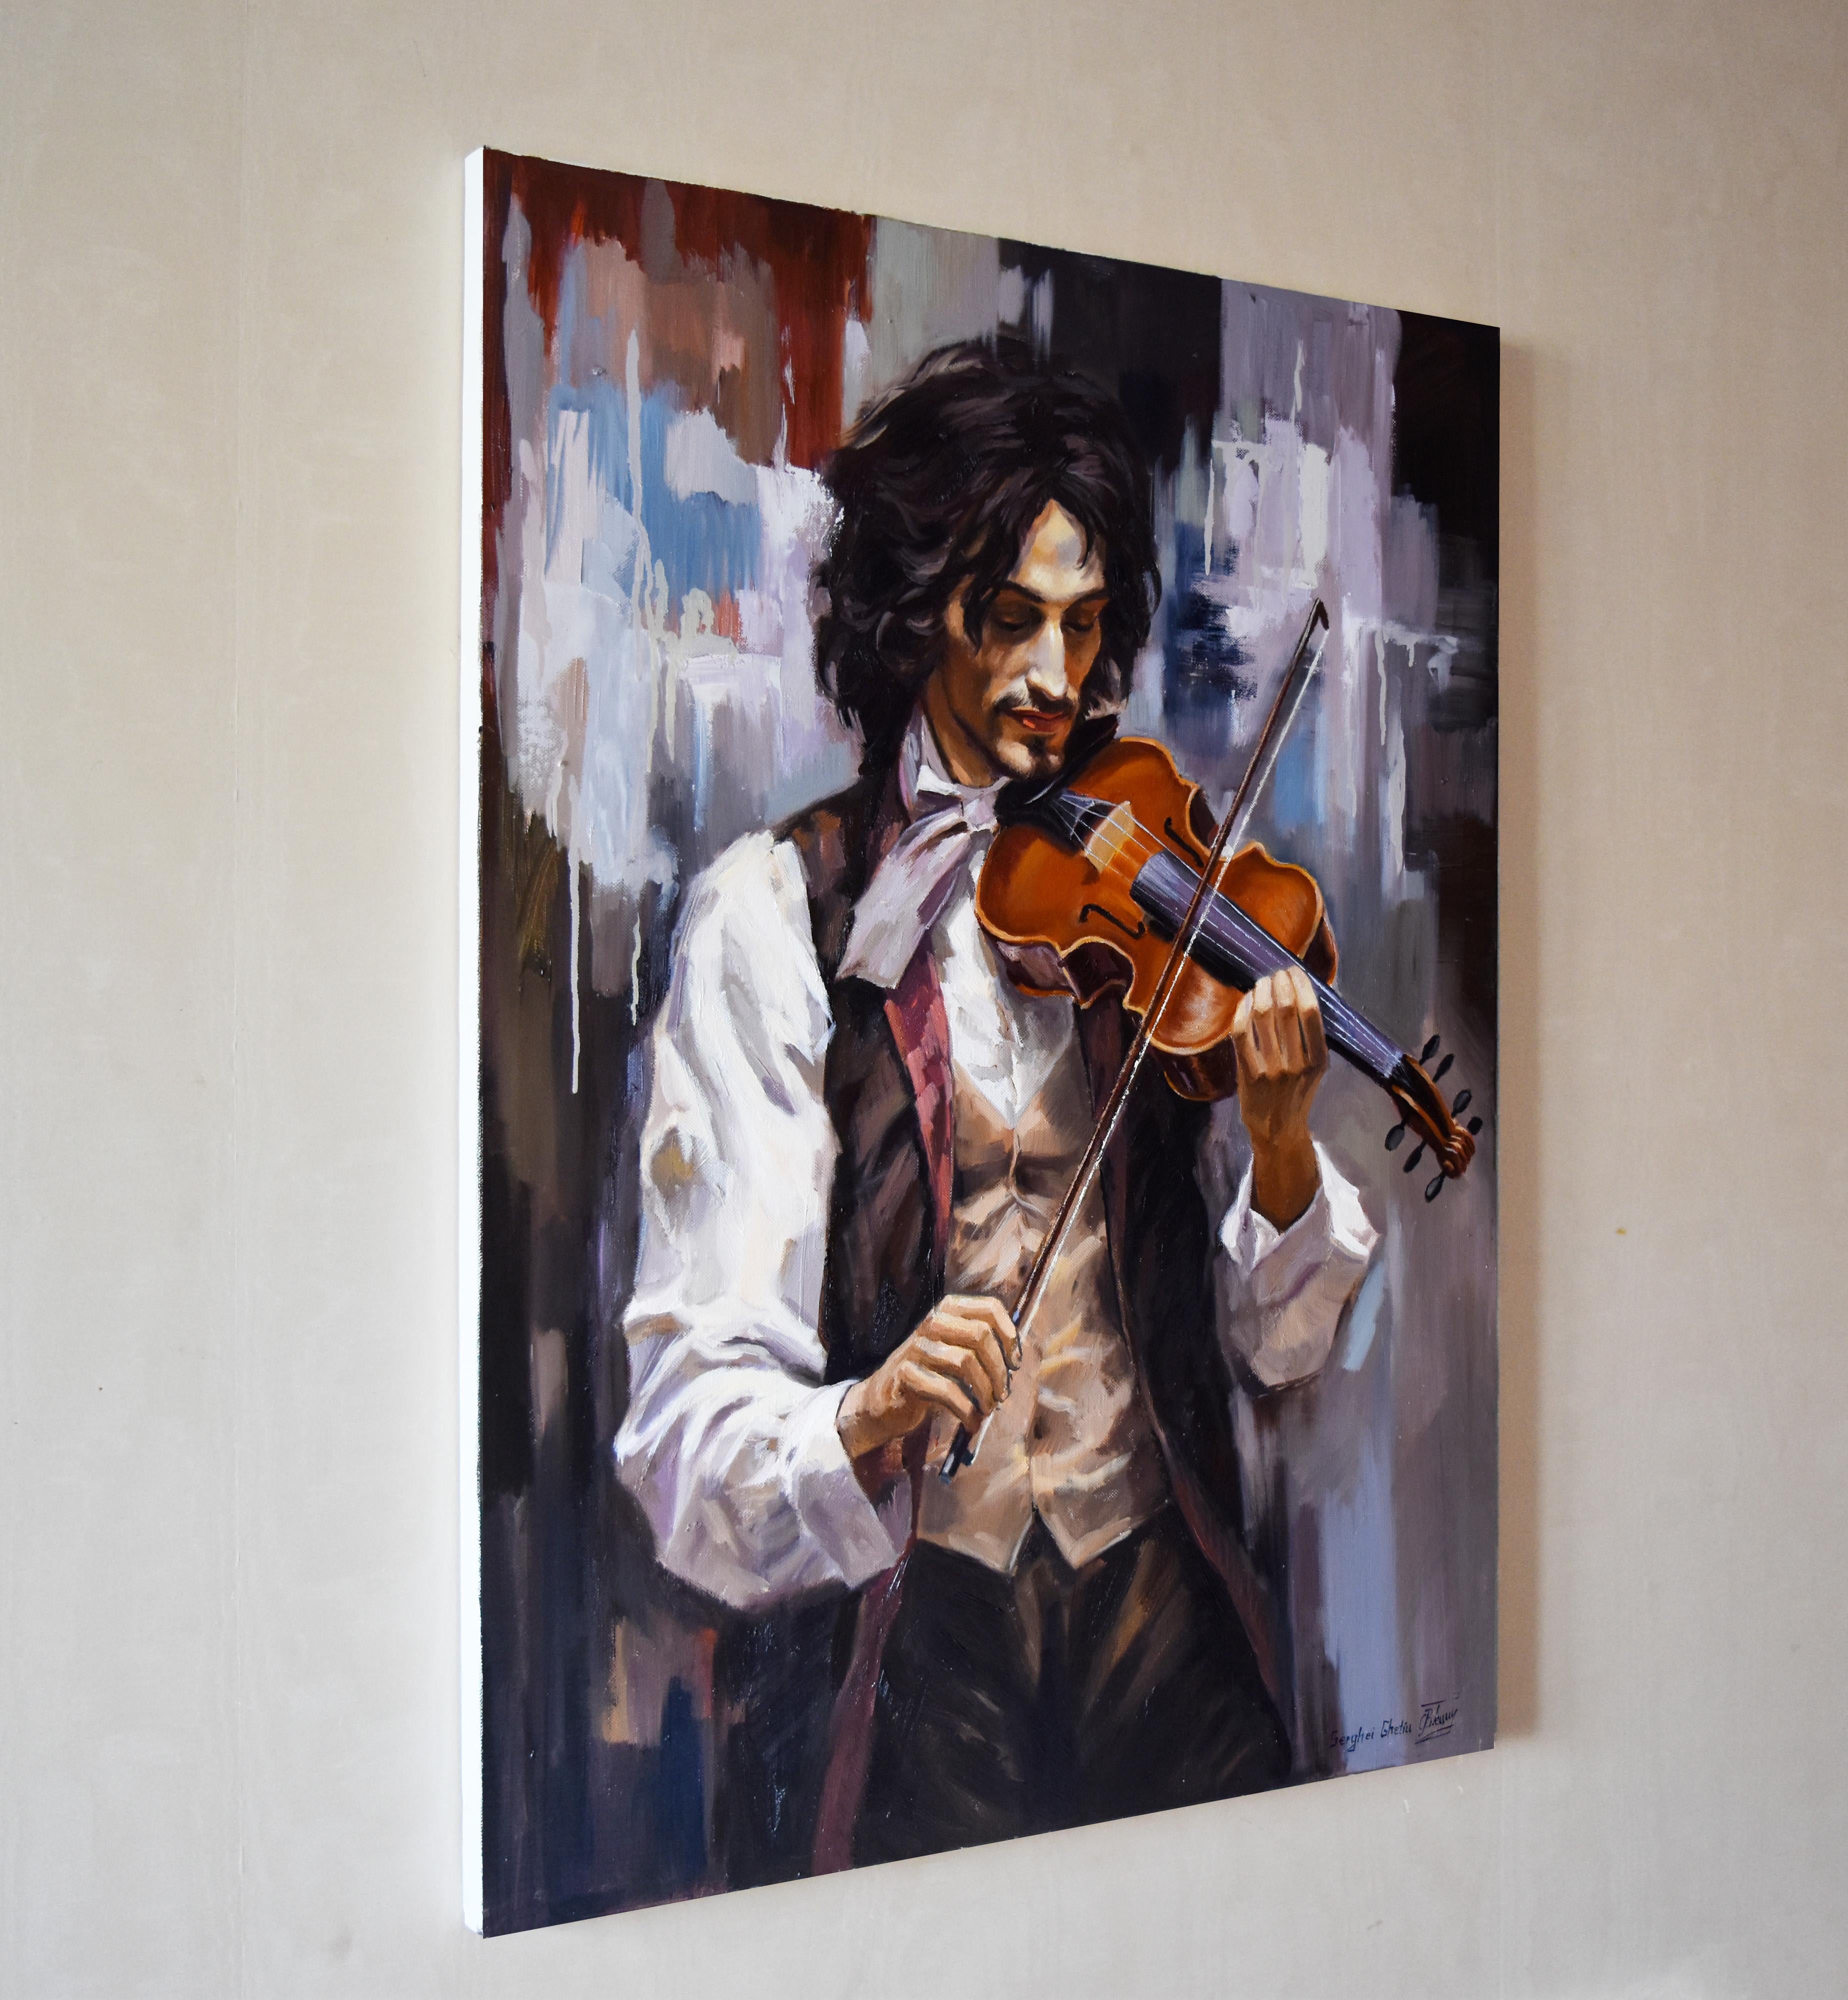 My interpretation on the great Italian violinist Niccolò Paganini (27 October 1782 – 27 May 1840) who was an Italian violinist and composer. He was the most celebrated violin virtuoso of his time and left his mark as one of the pillars of modern